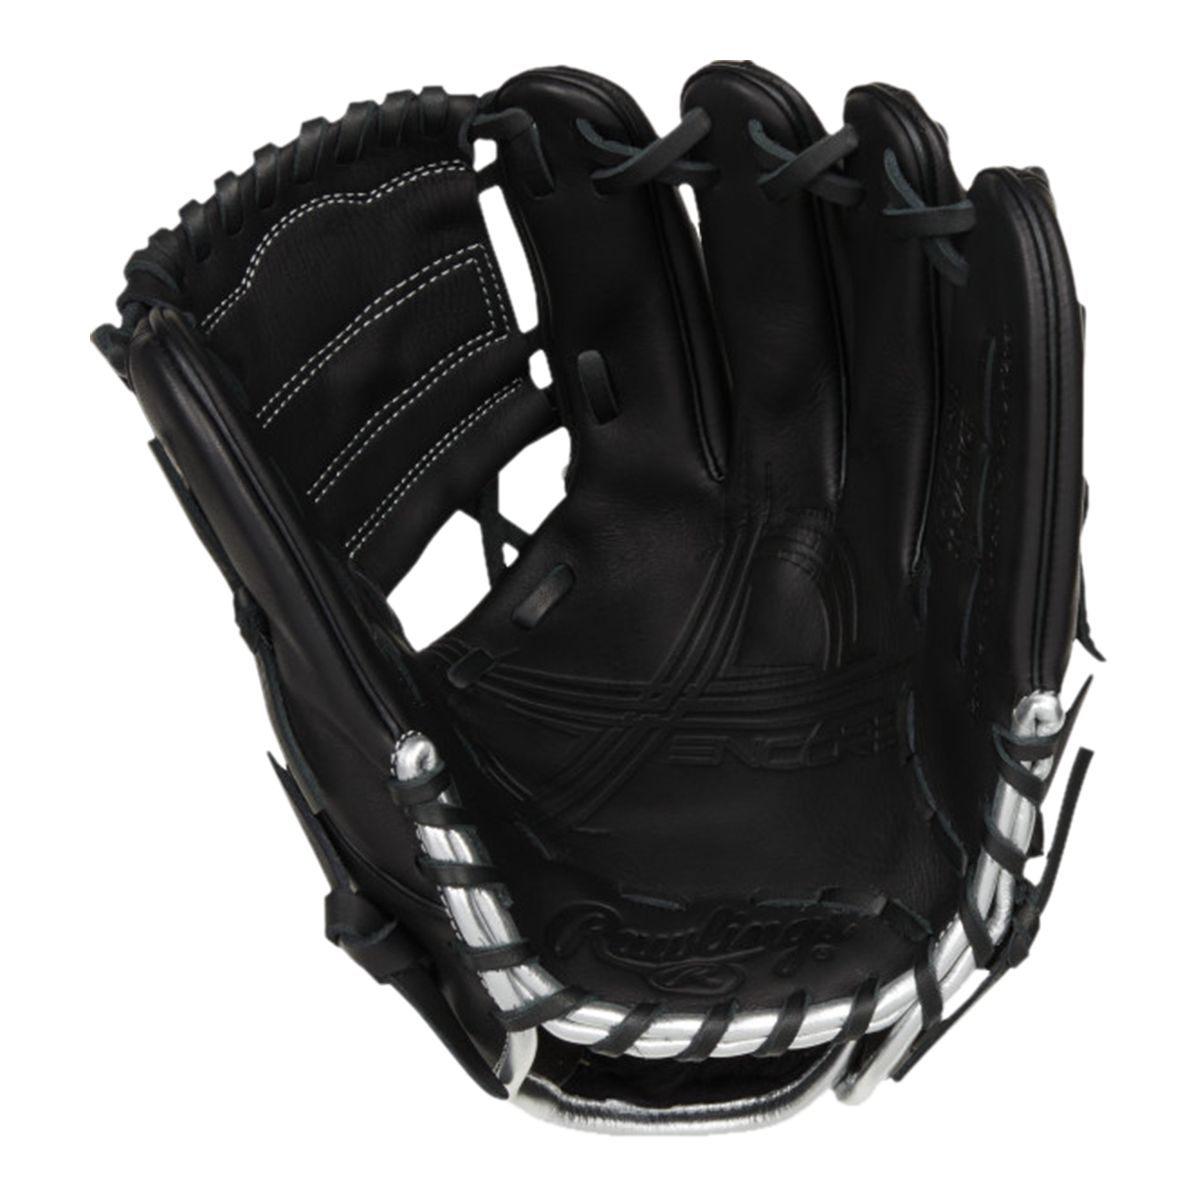 Rawlings R9 Series 12.5 Inch Basket Web Right Hand Catcher